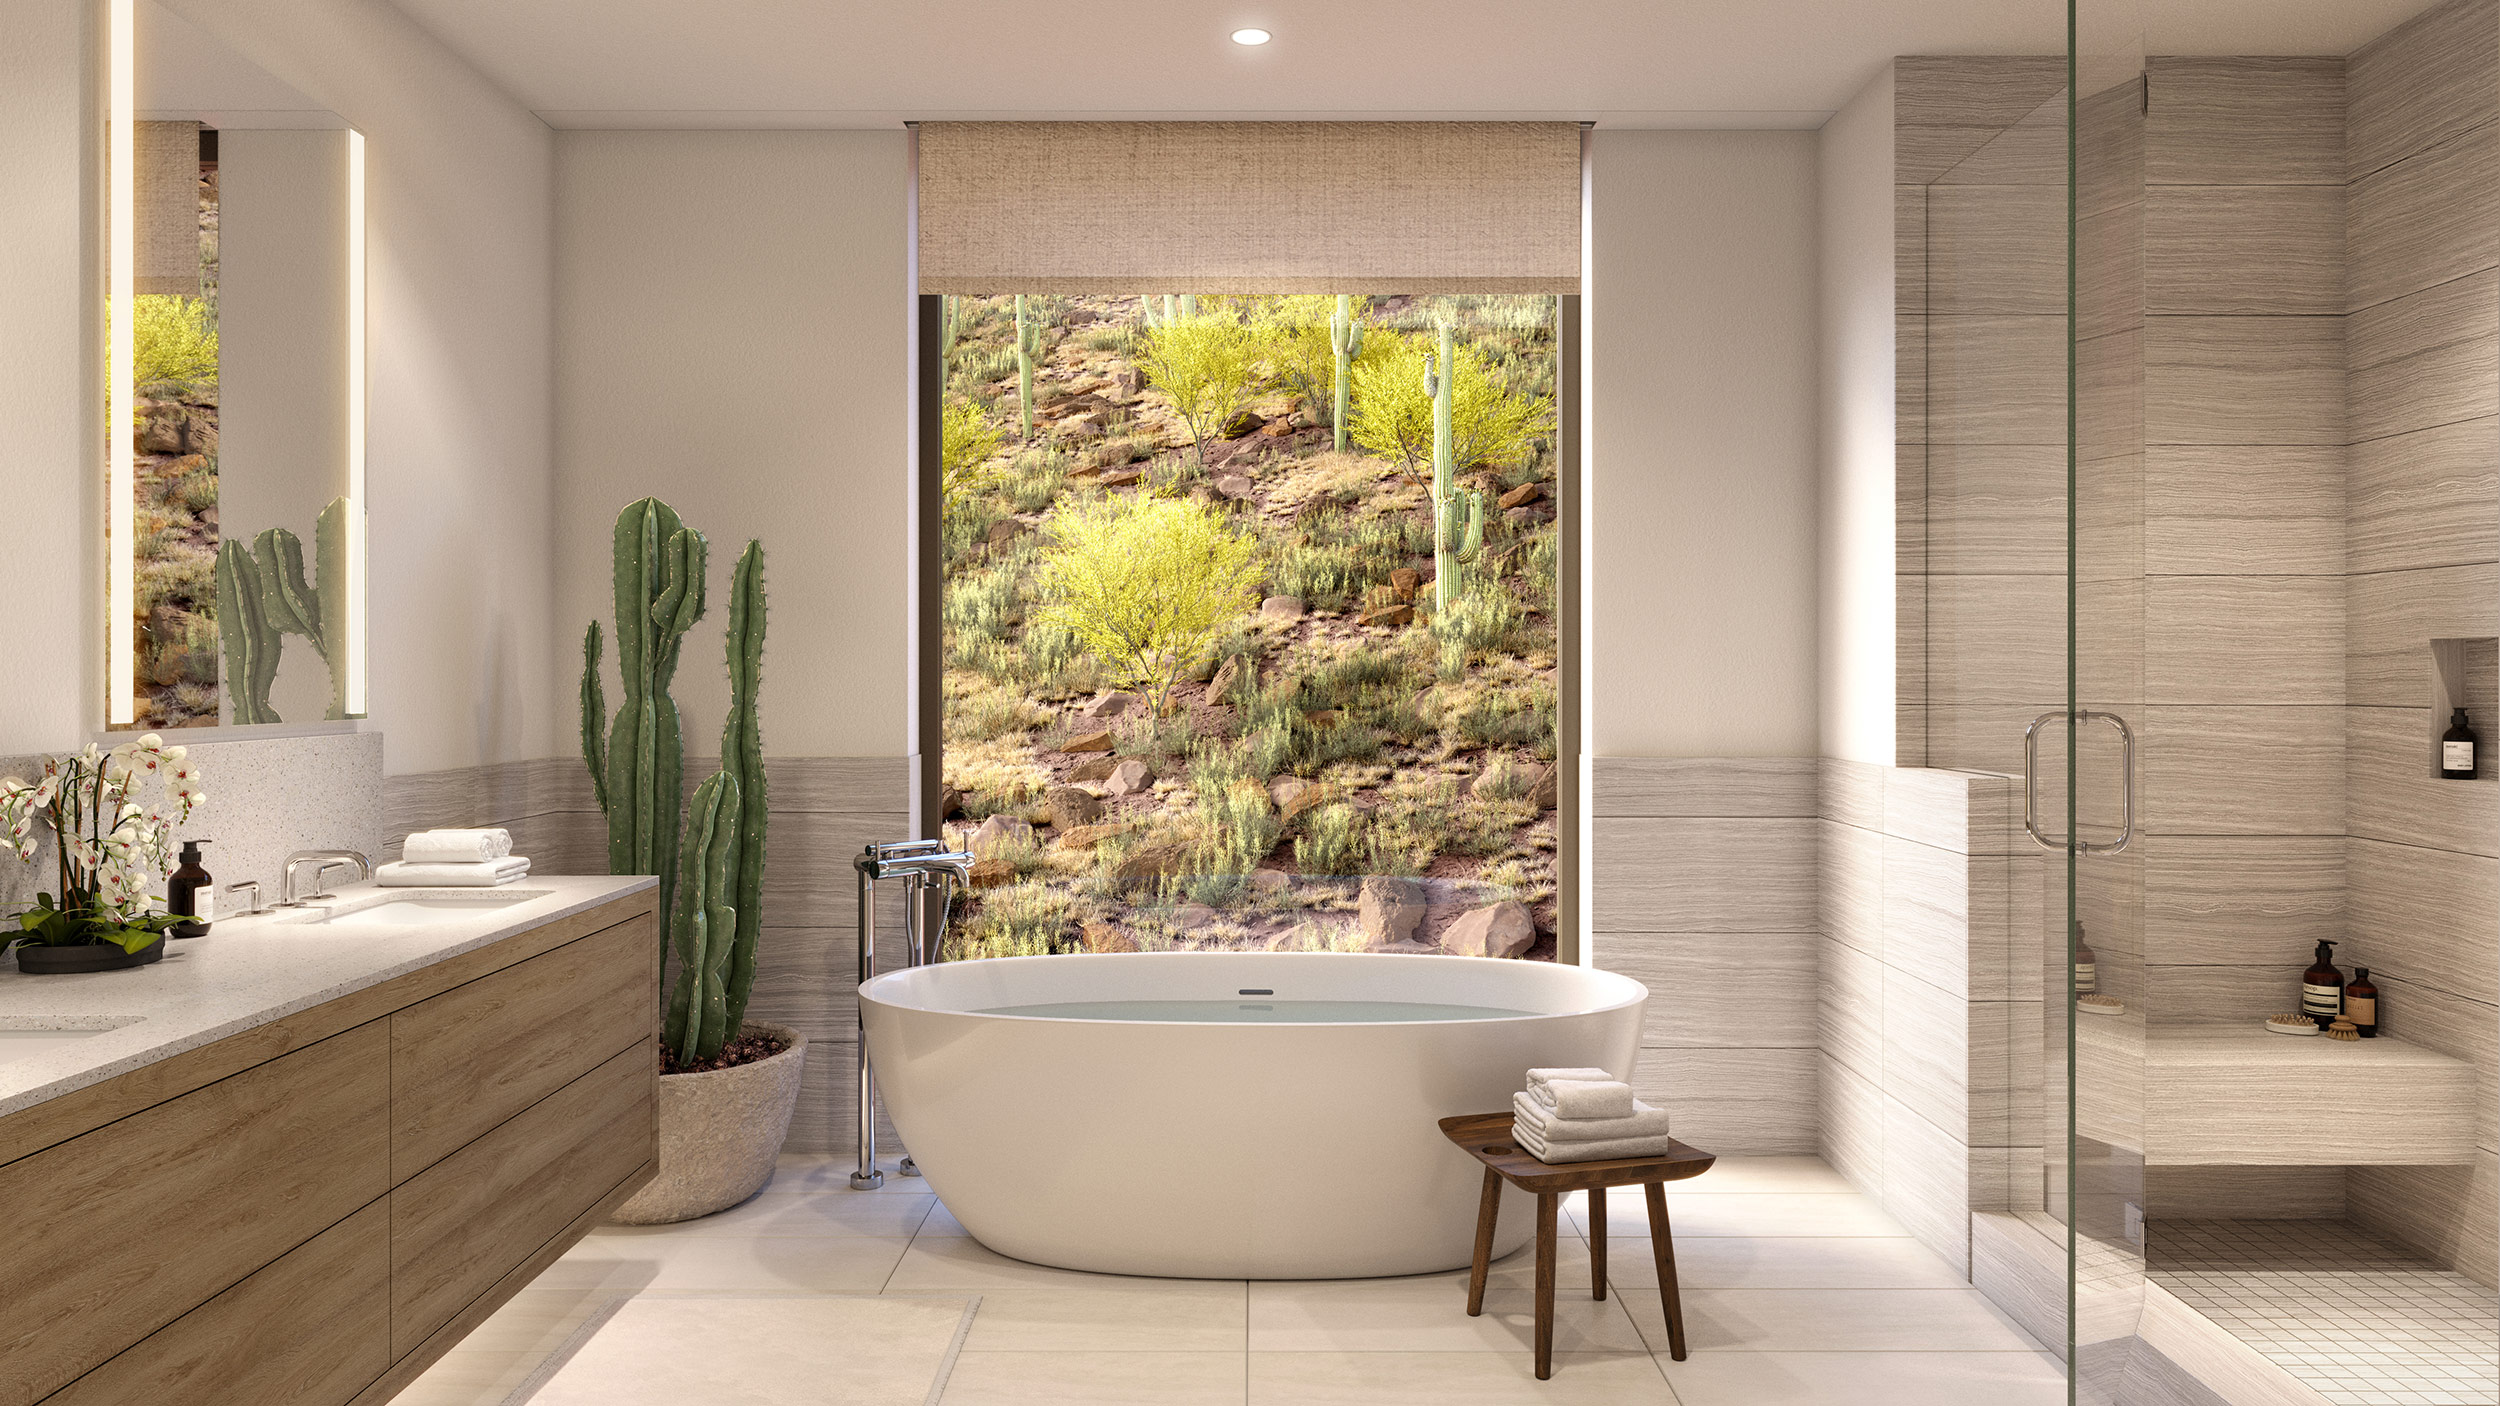 Spa-inspired master bathrooms featuring frameless glass shower, freestanding tub, and elegant Waterworks fixtures.